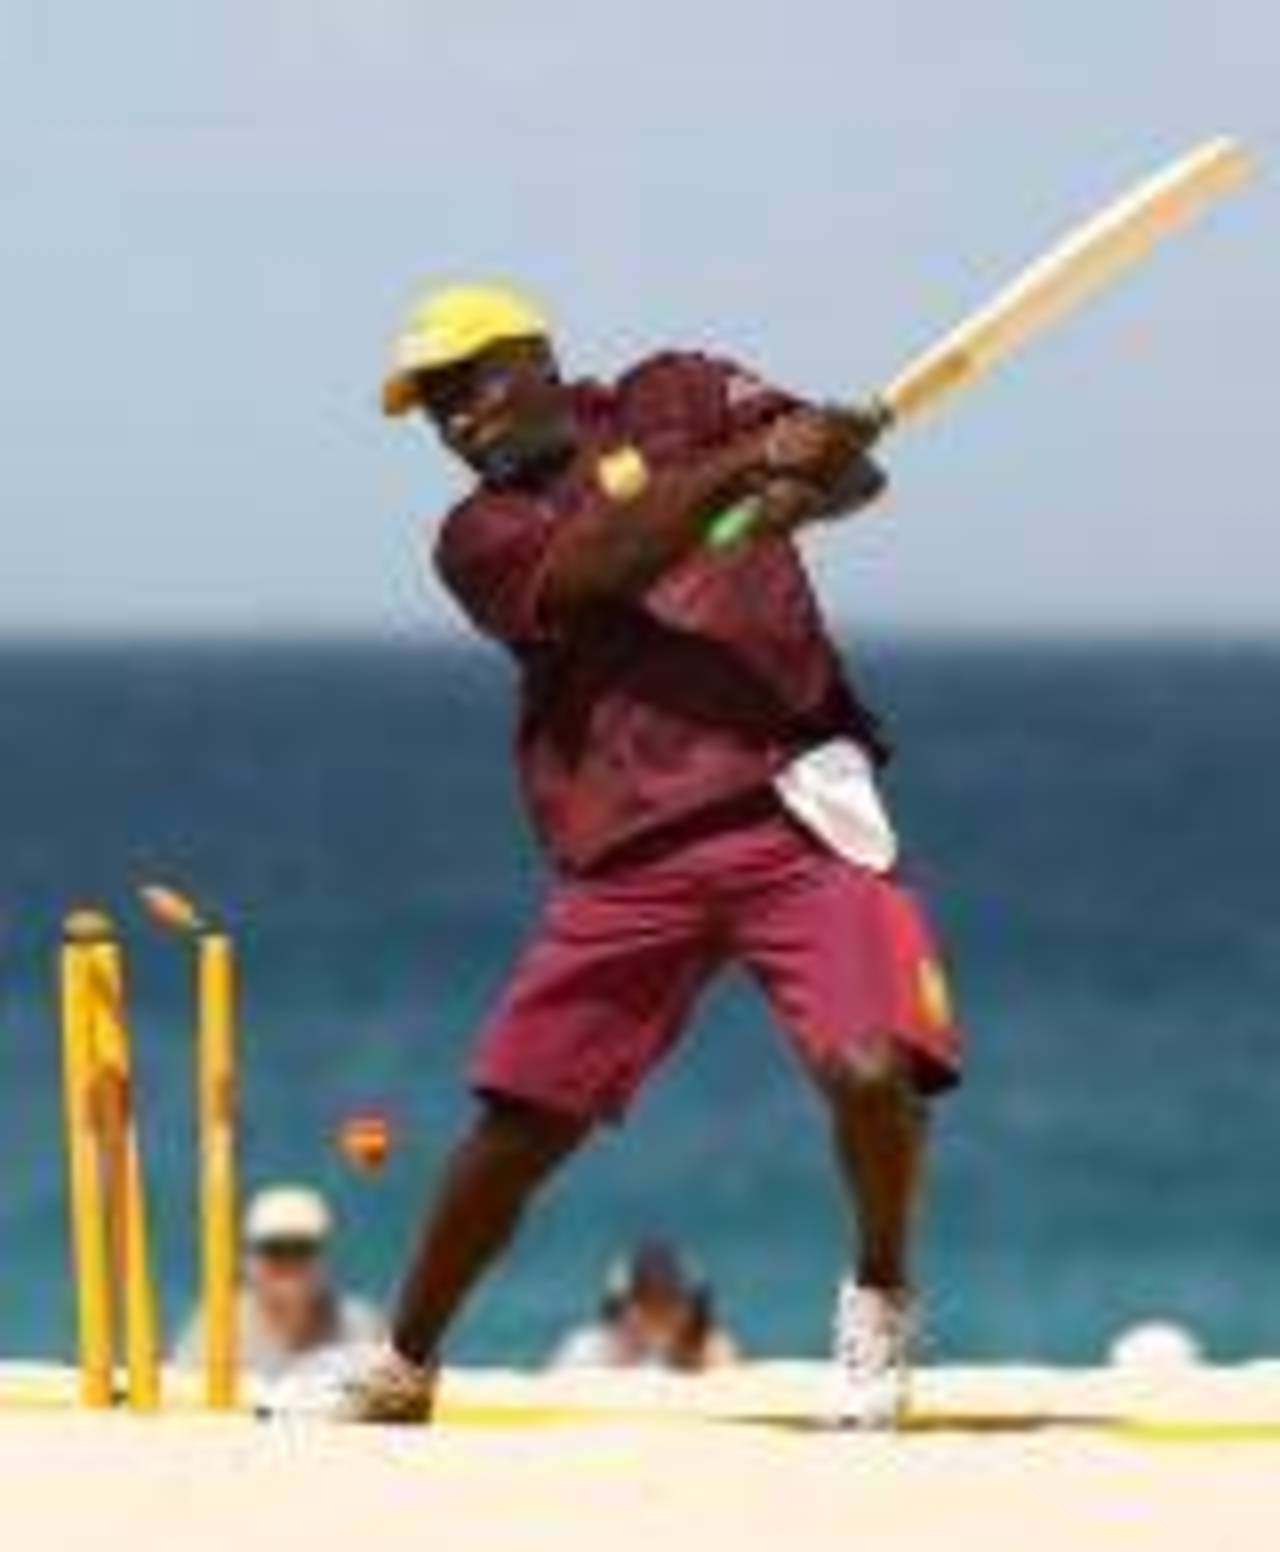 Viv Richards is bowled during beach cricket, Scarborough Beach, Perth, January 27, 2007